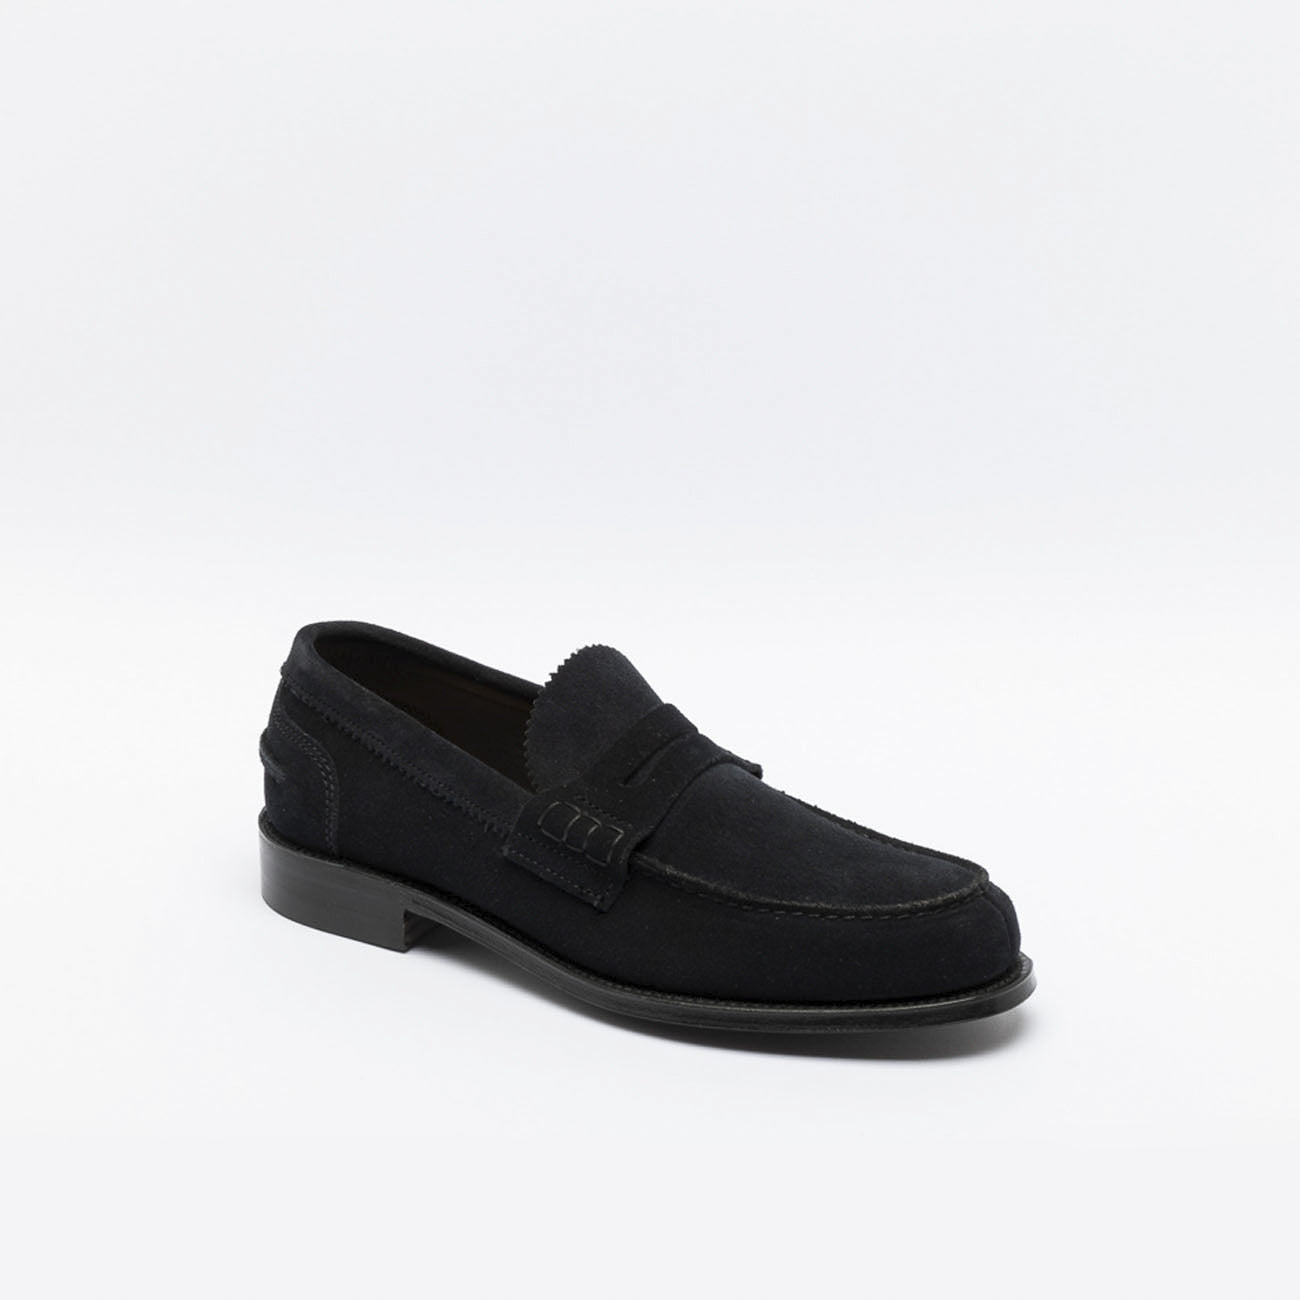 Cheaney Joseph & Sons alt navy suede loafer